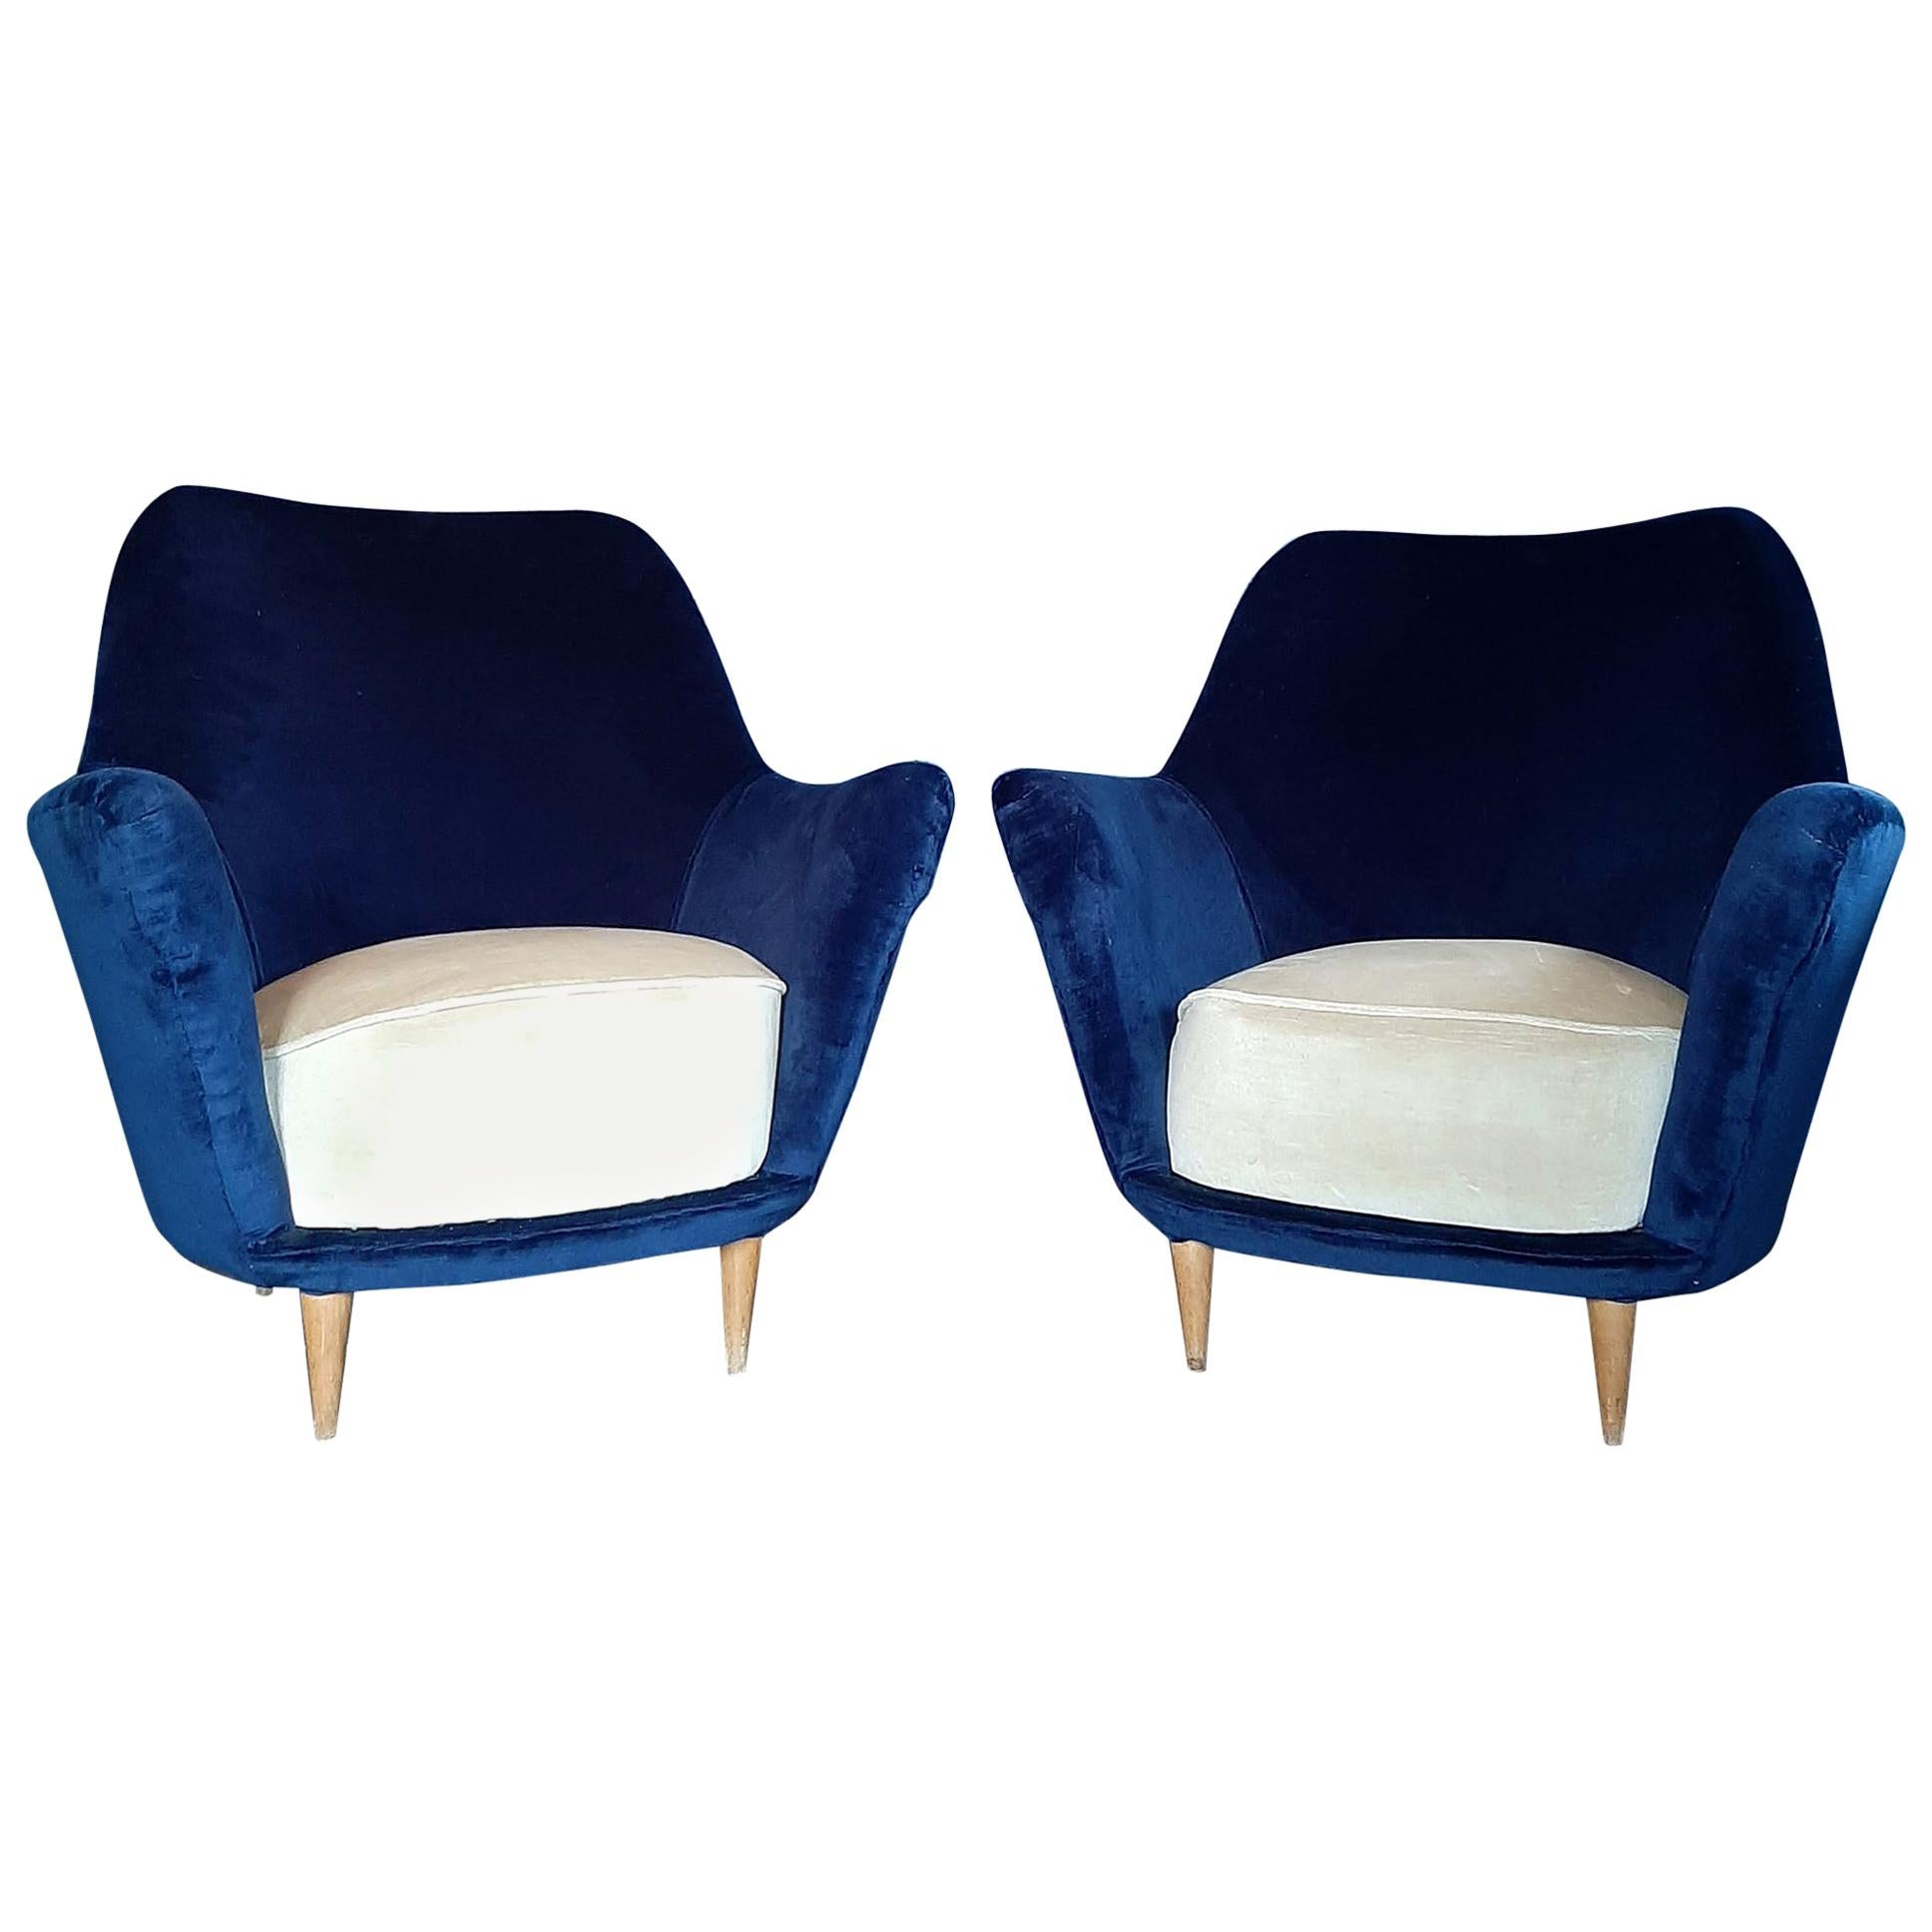 Pair of Vintage Italian Armchairs in Cobalt Blue and Crème